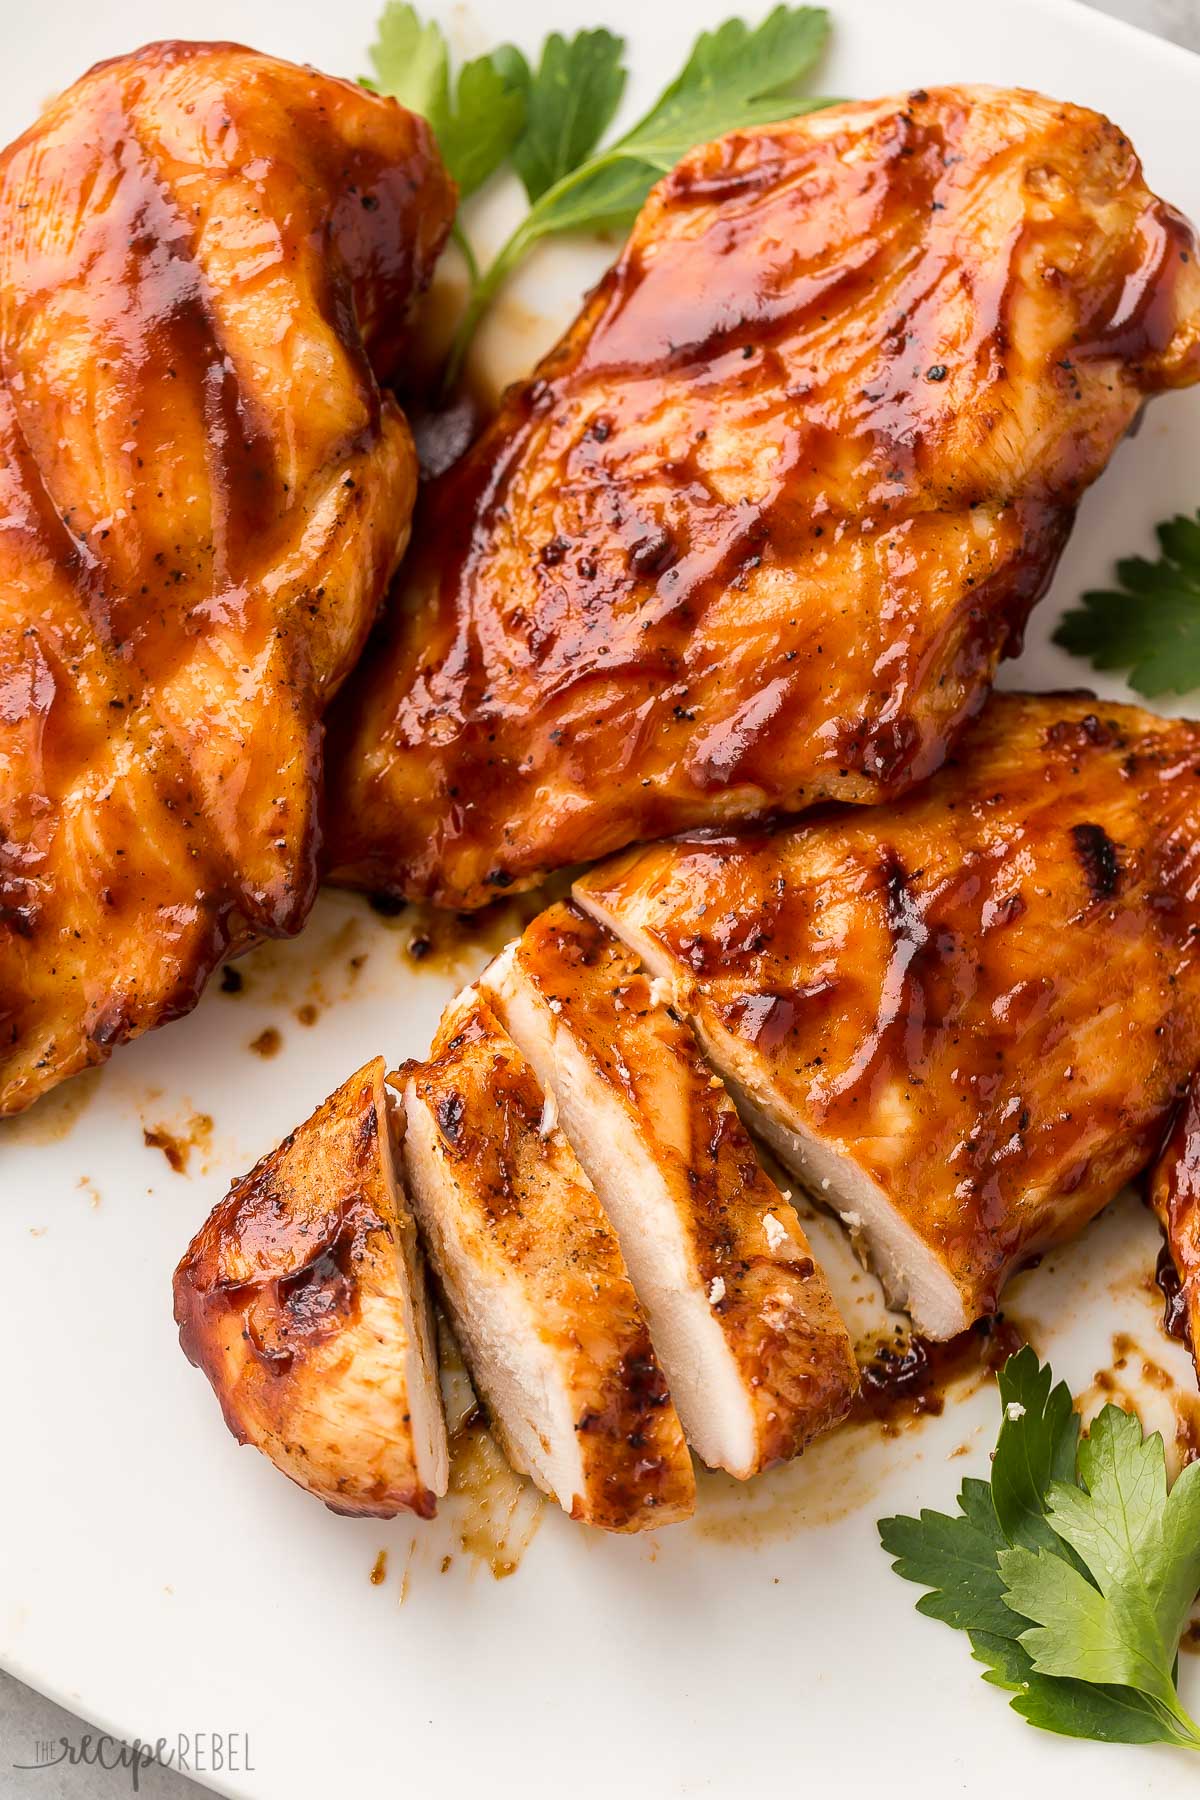 How Do You Brine Chicken Breast For Grilling?